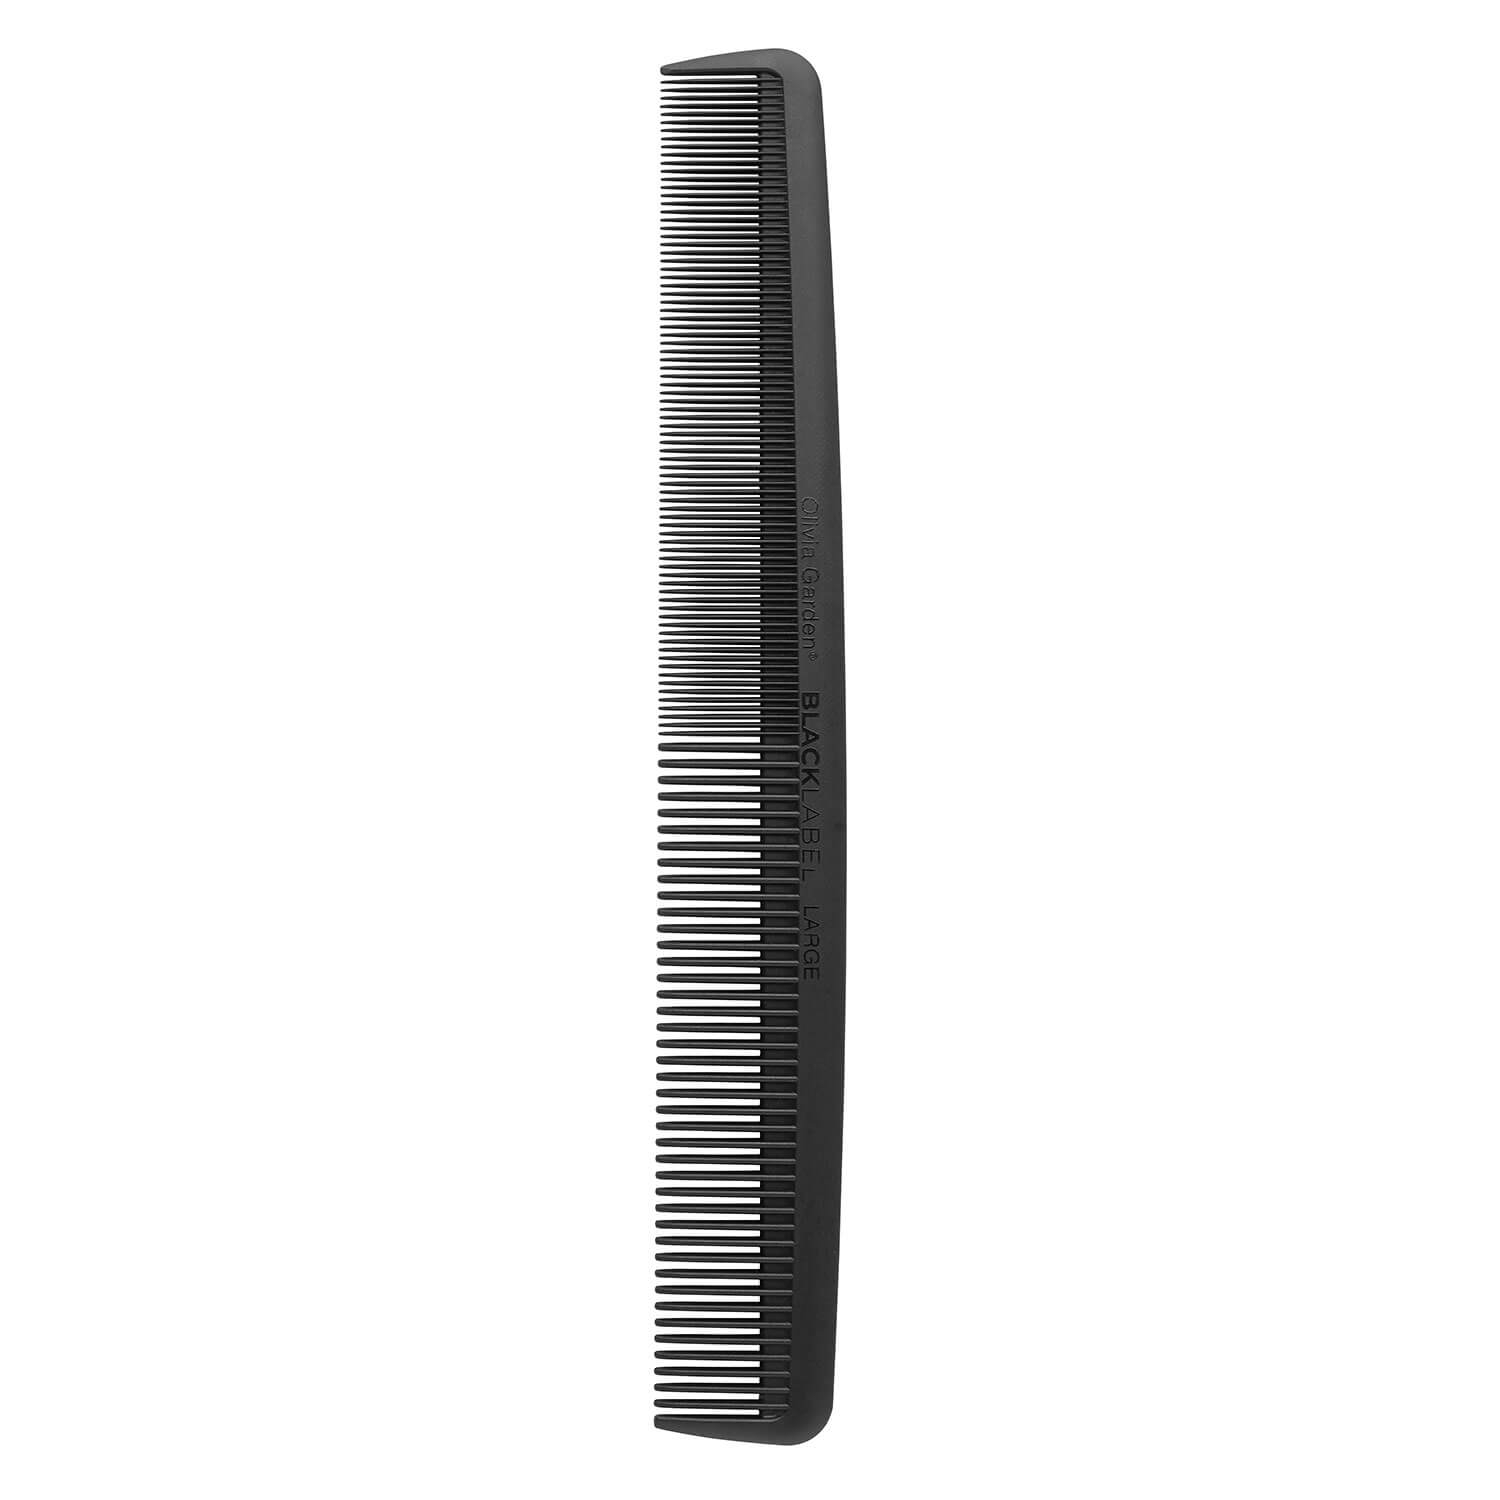 Product image from Olivia Garden - Black Label Comb Large